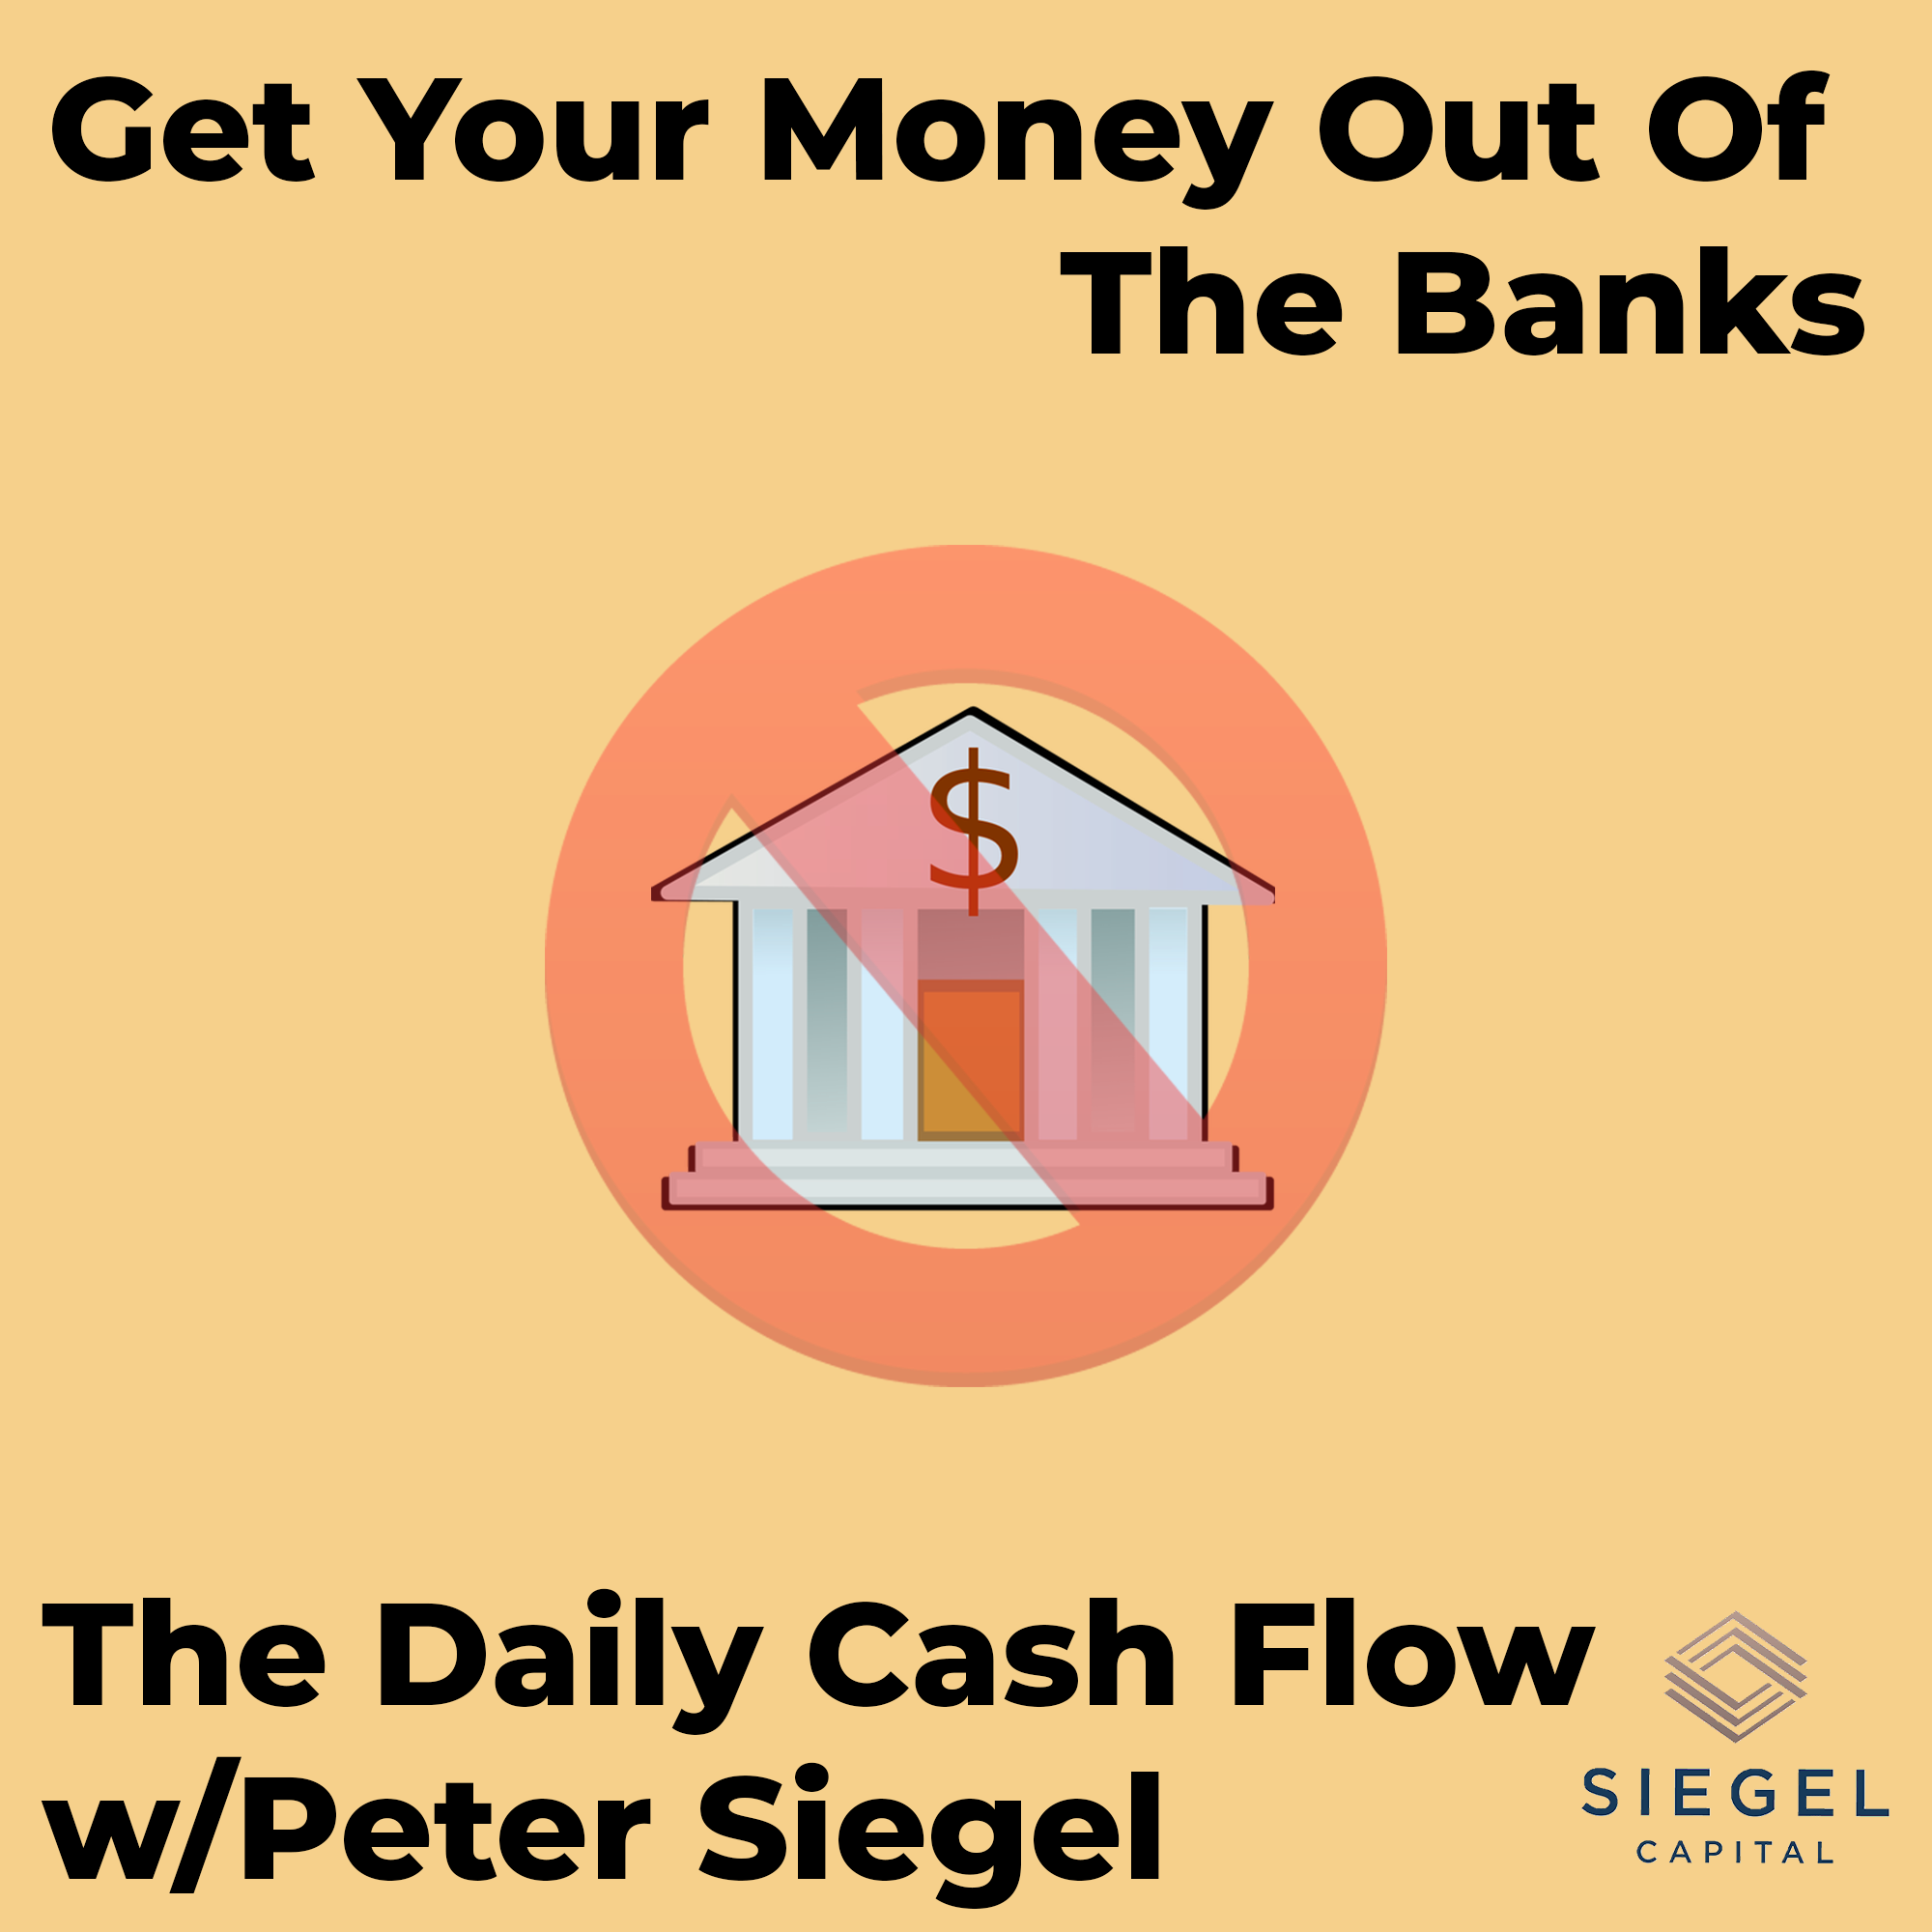 9 Get Your Money Out Of The Banks The Daily Cash Flow w/ Peter